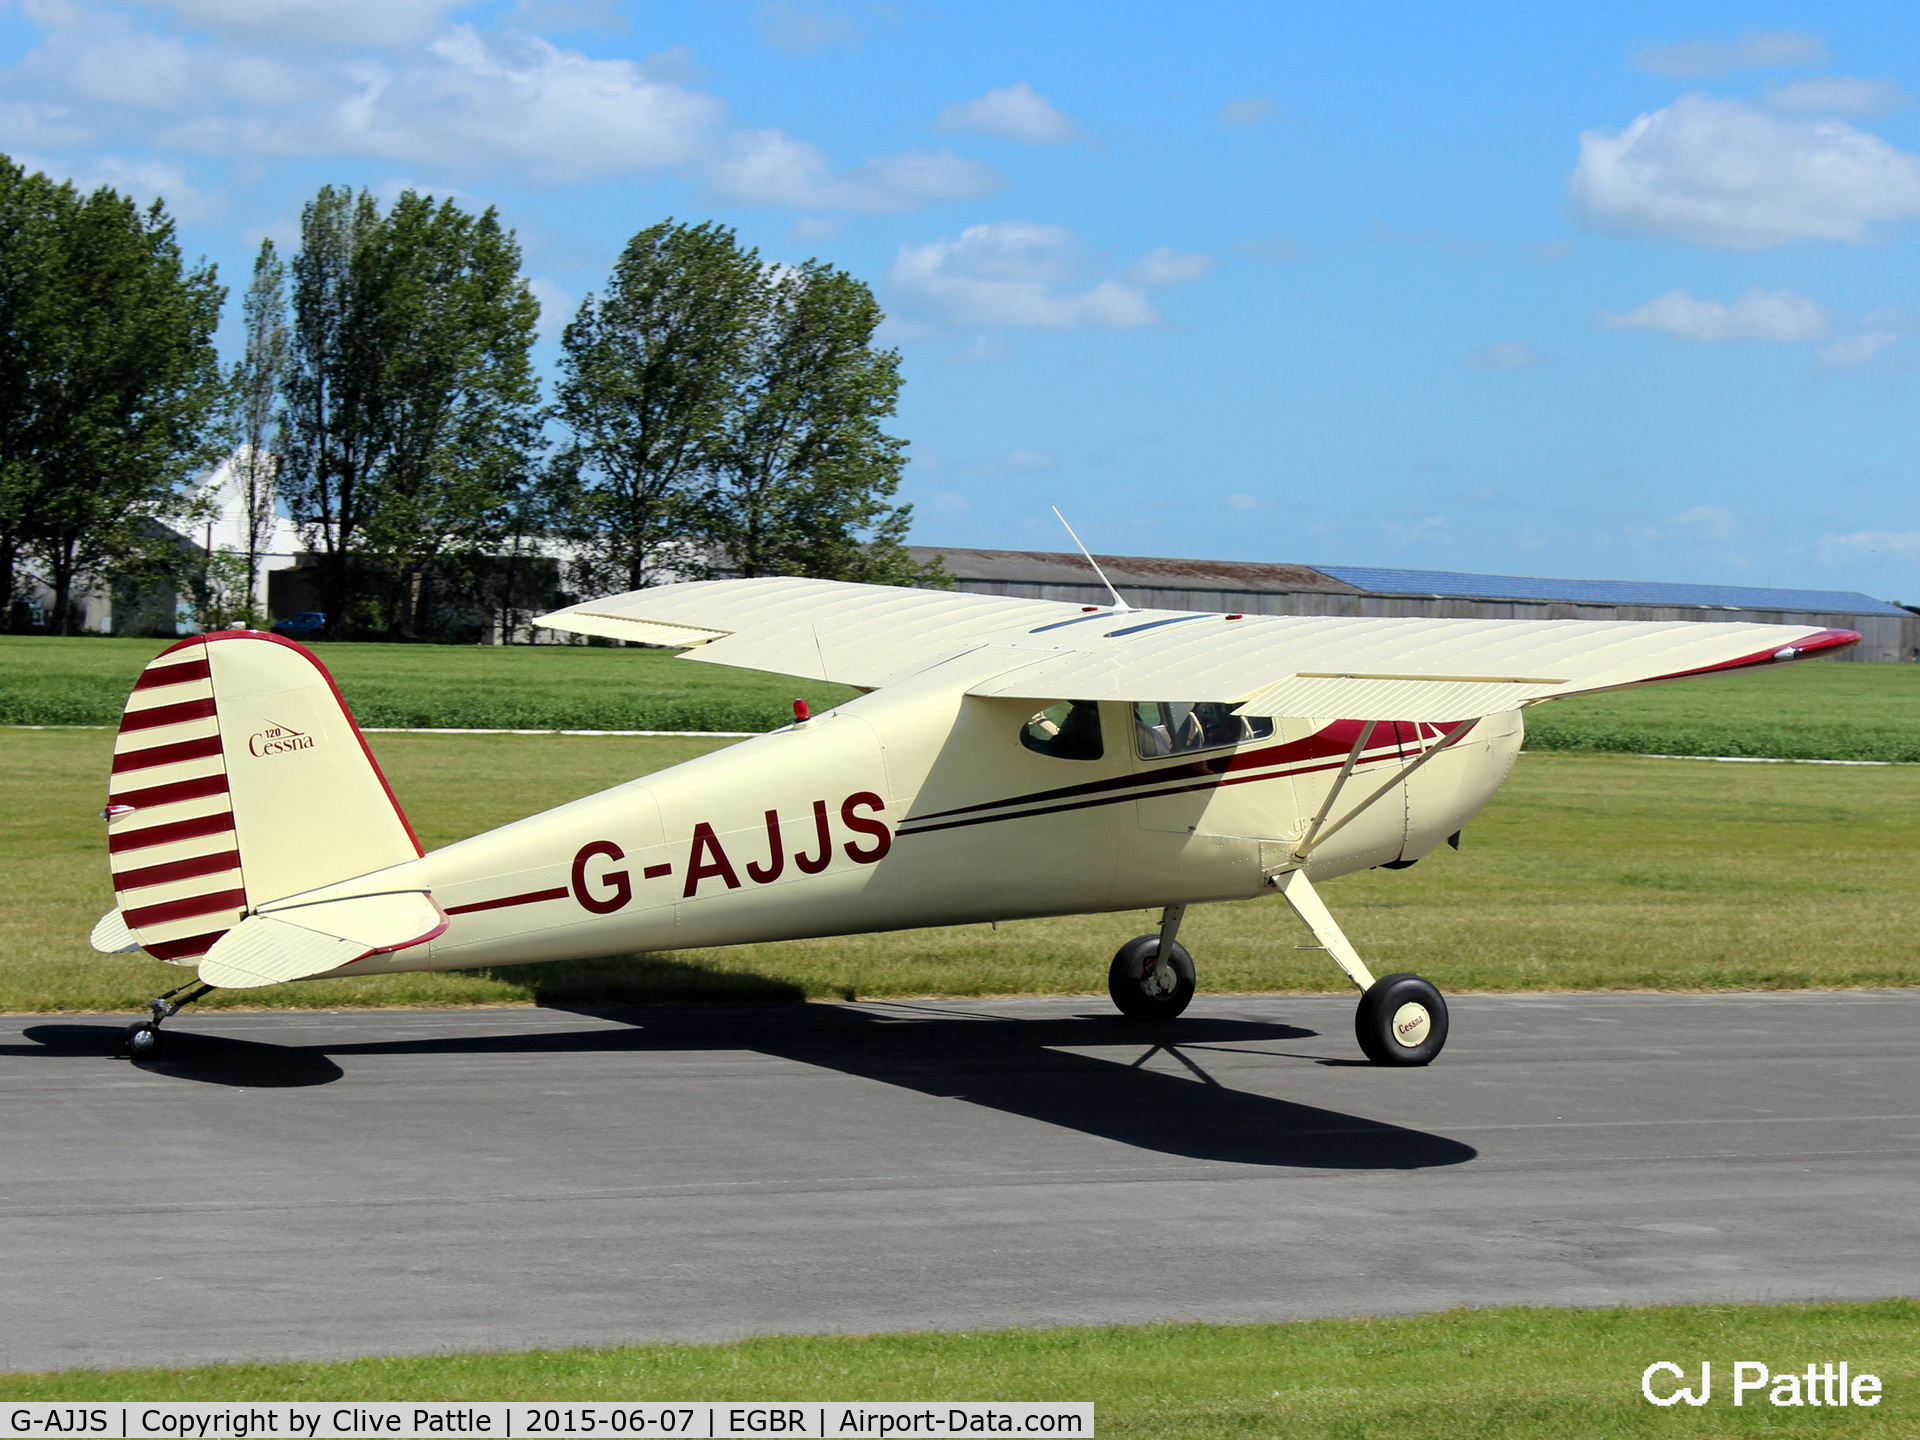 G-AJJS, 1947 Cessna 120 C/N 13047, In action at The Real Aeroplane Company Ltd Radial Fly-In, Breighton Airfield, Yorkshire, U.K.  - EGBR